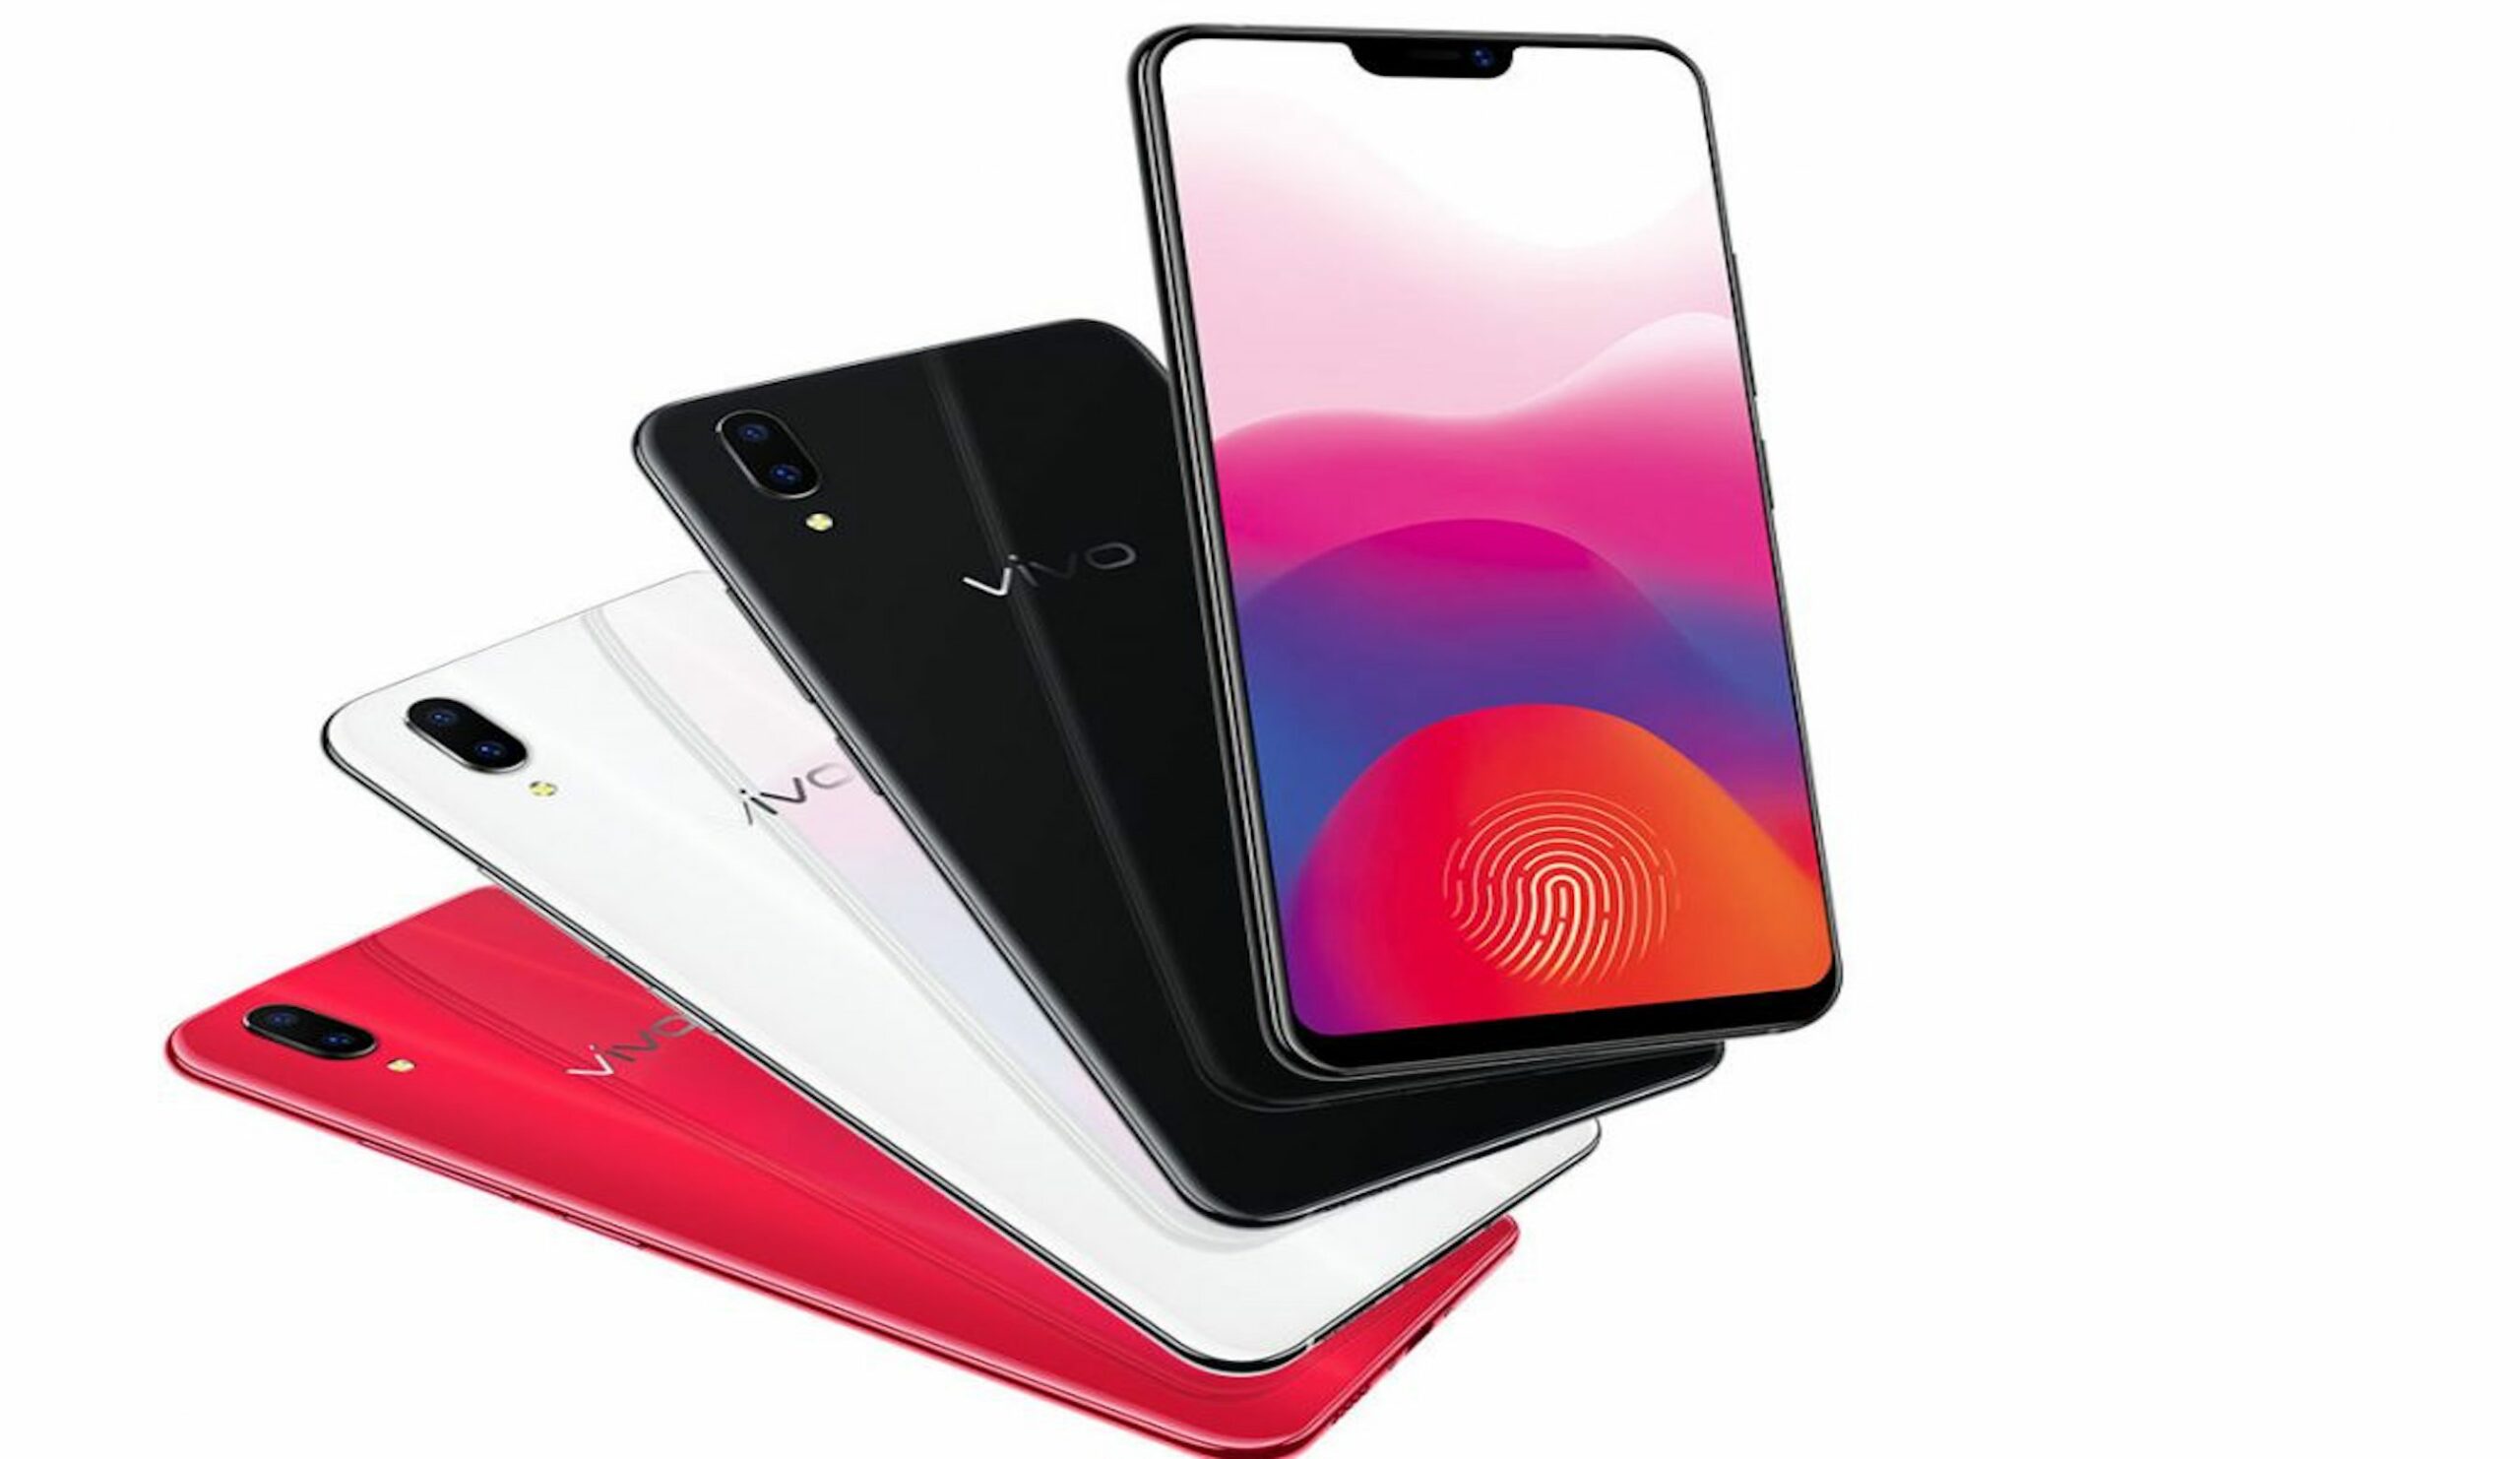 Vivo launches the 6.28-inch X21 with Qualcomm AIE and in-screen fingerprint sensor